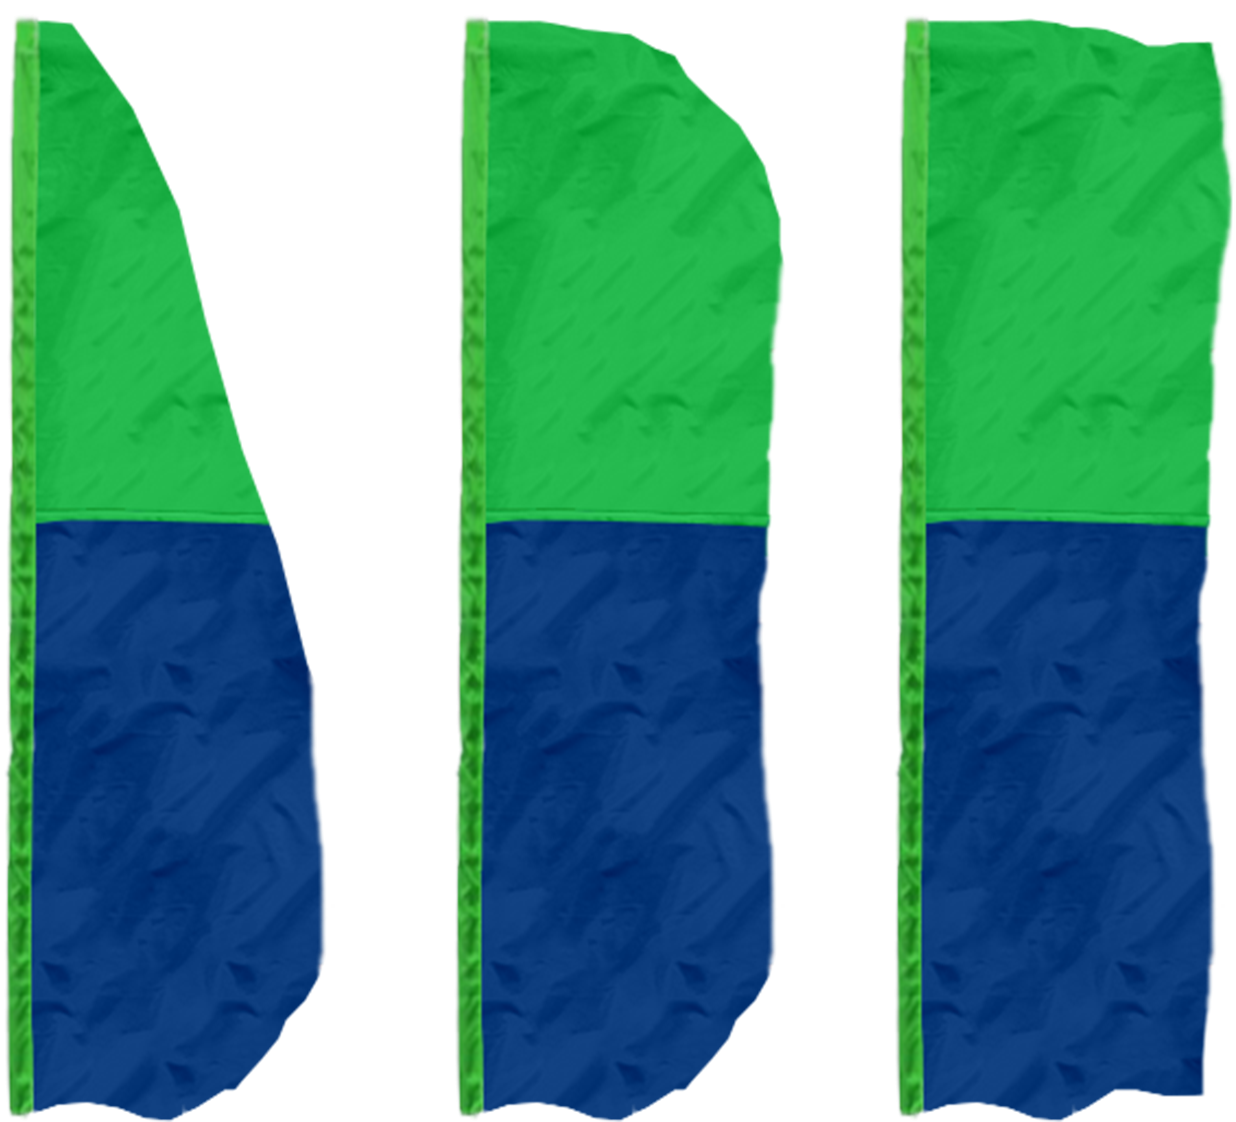 Abstract Greenand Blue Banners